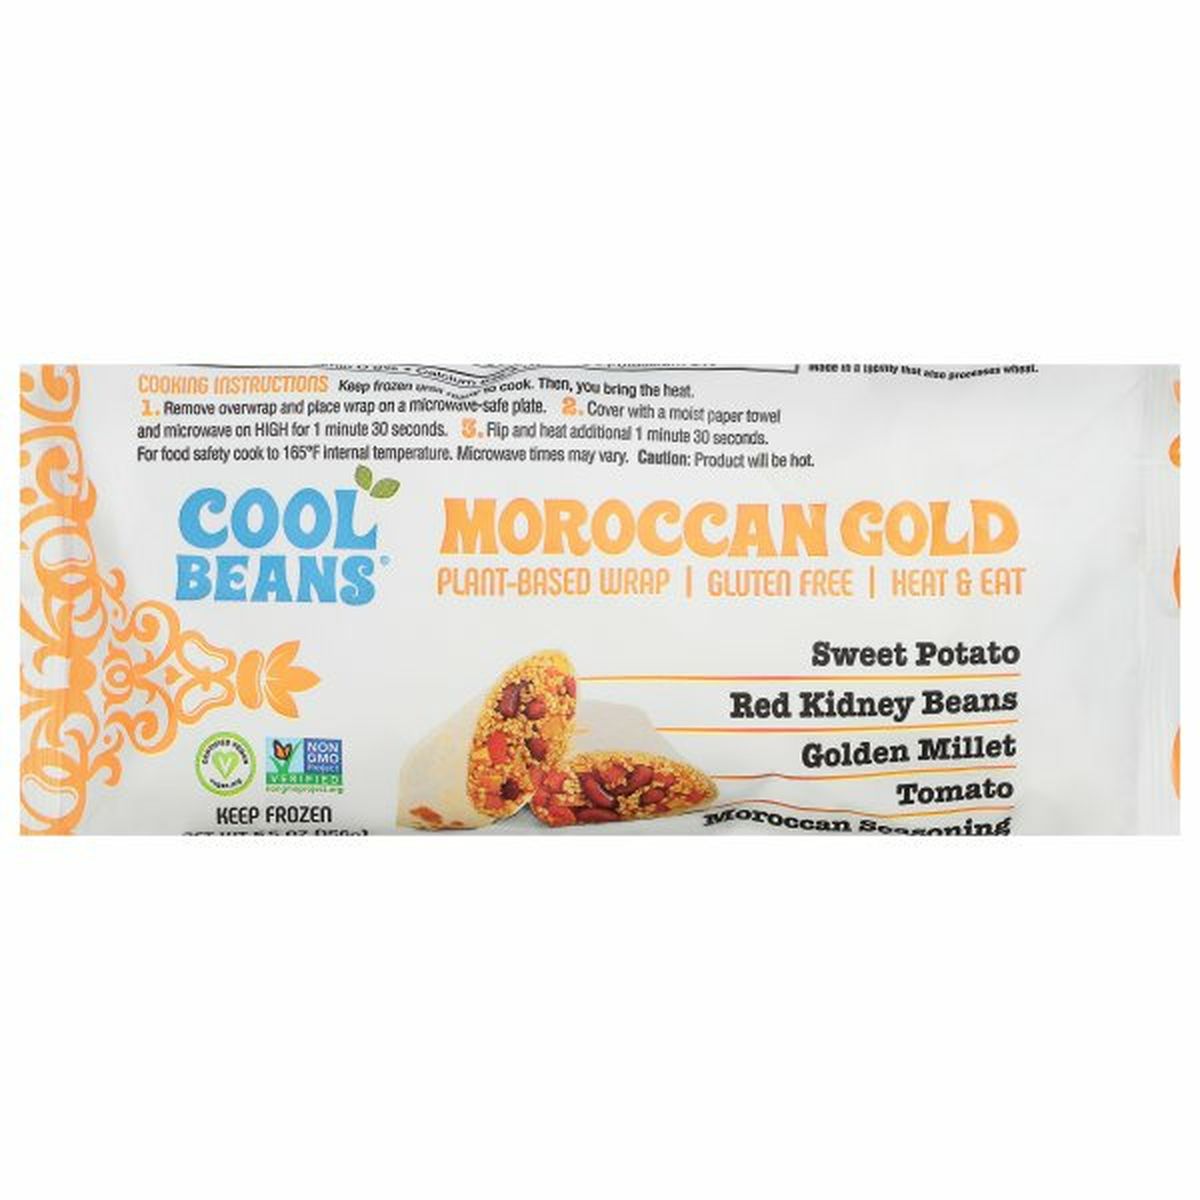 Calories in Cool Beans Plant-Based Wrap, Moroccan Gold